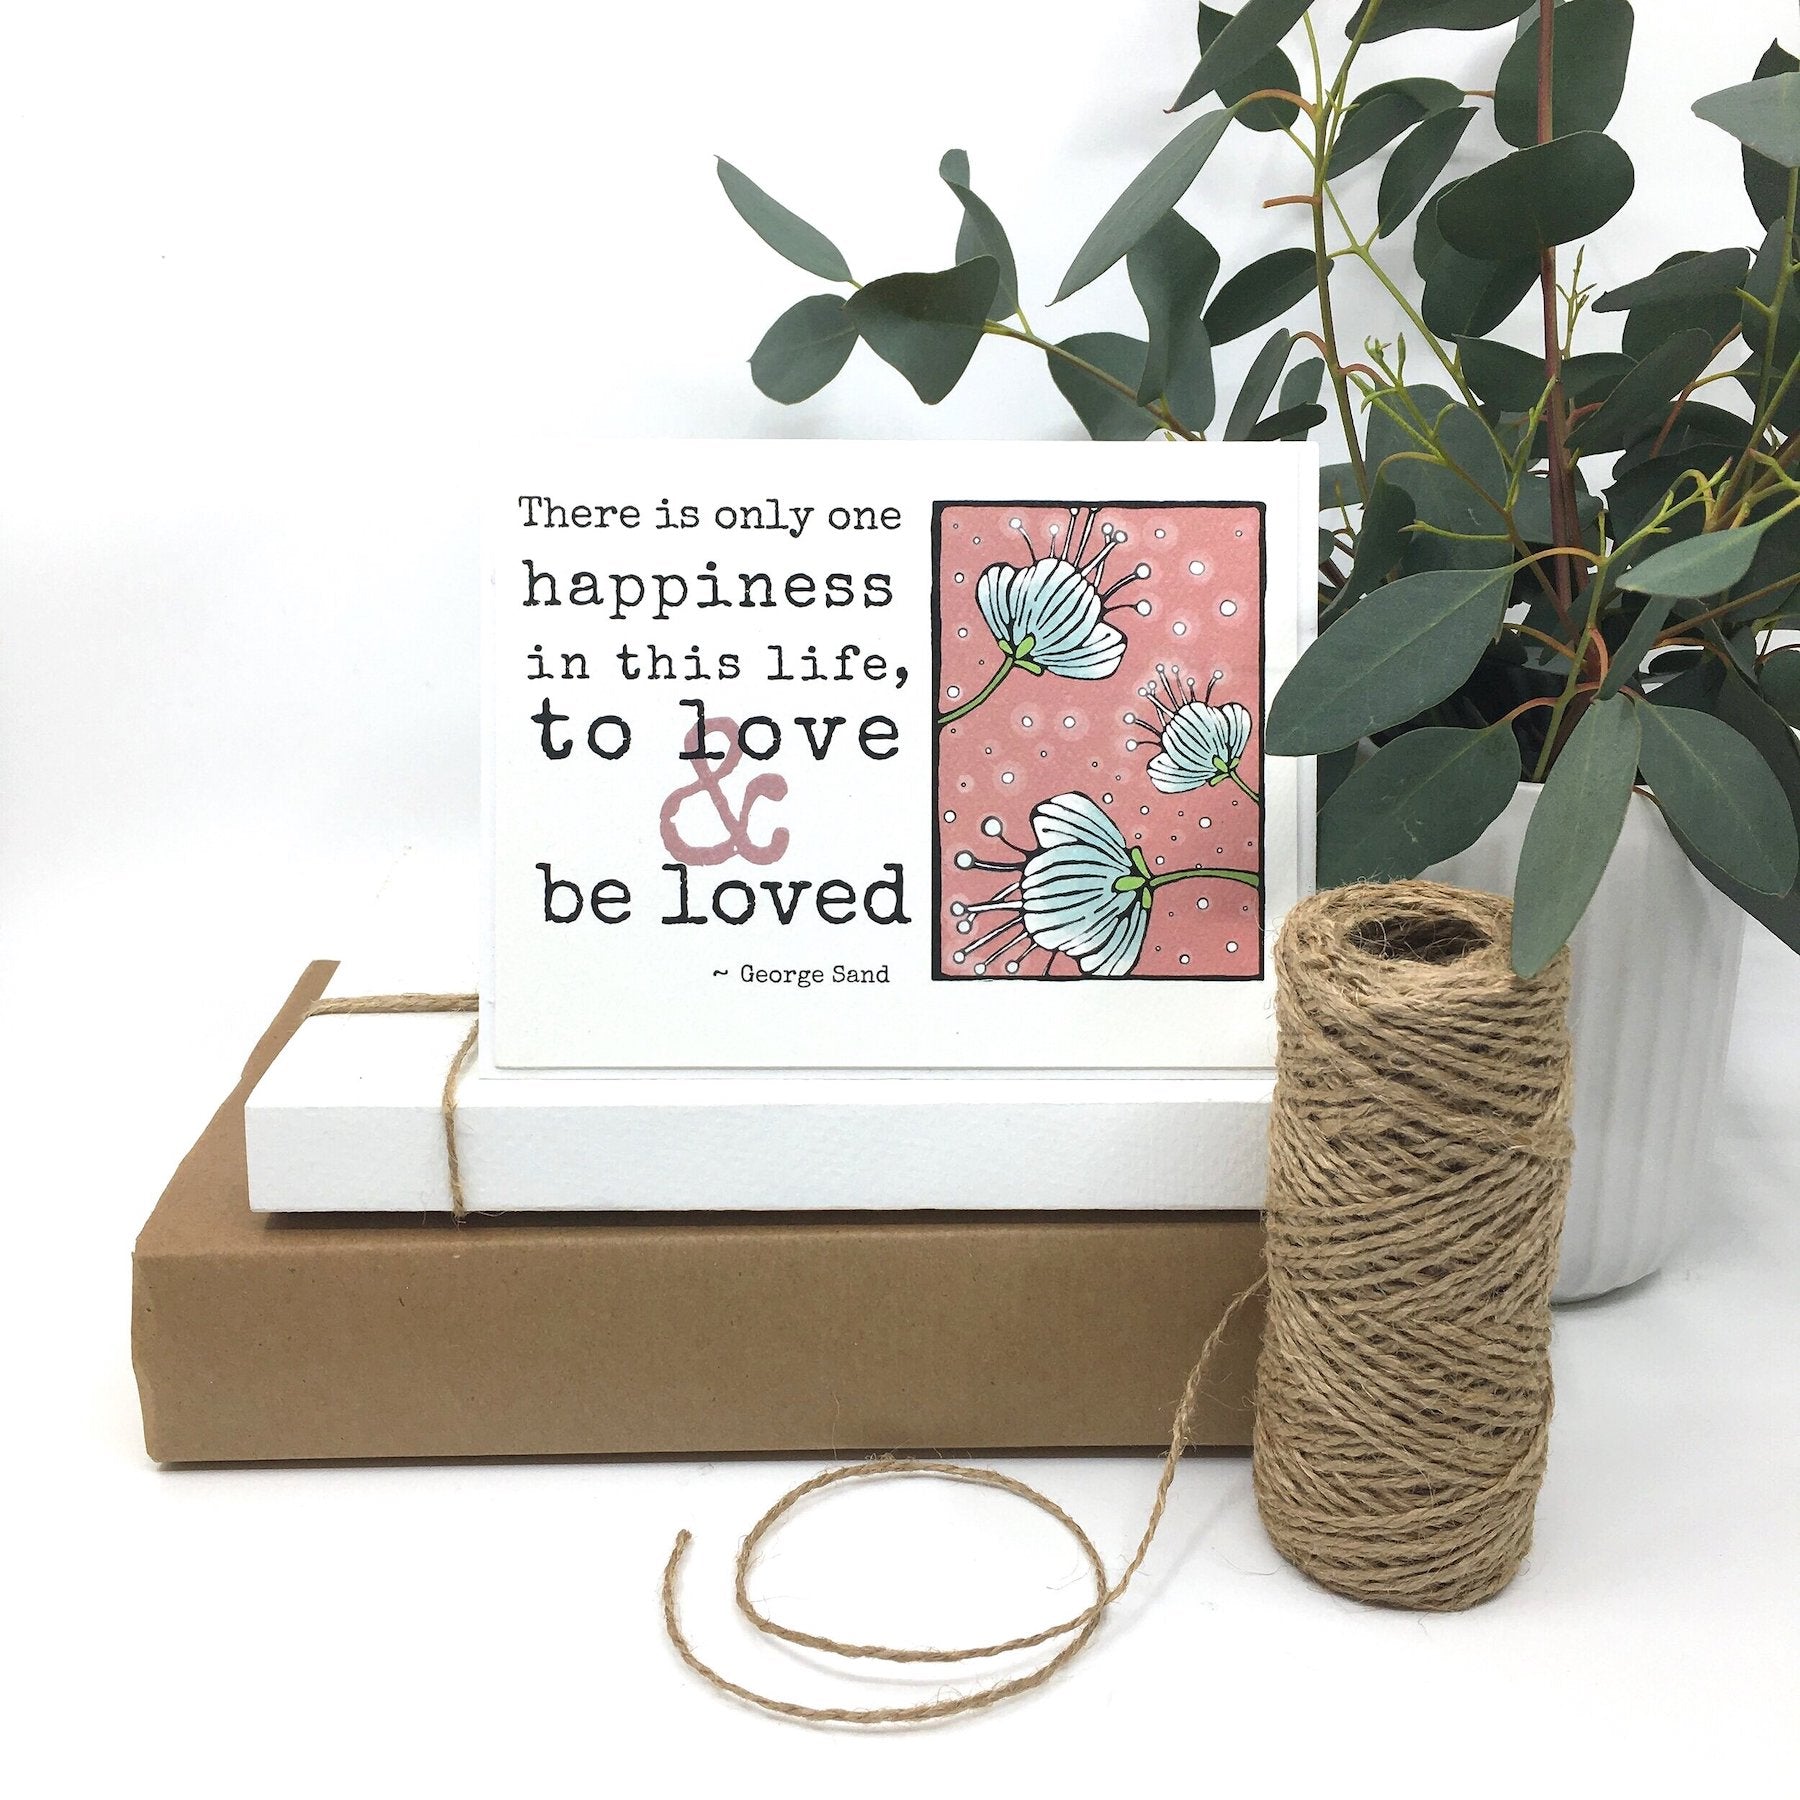 To Love & Be Loved - George Sand quote card